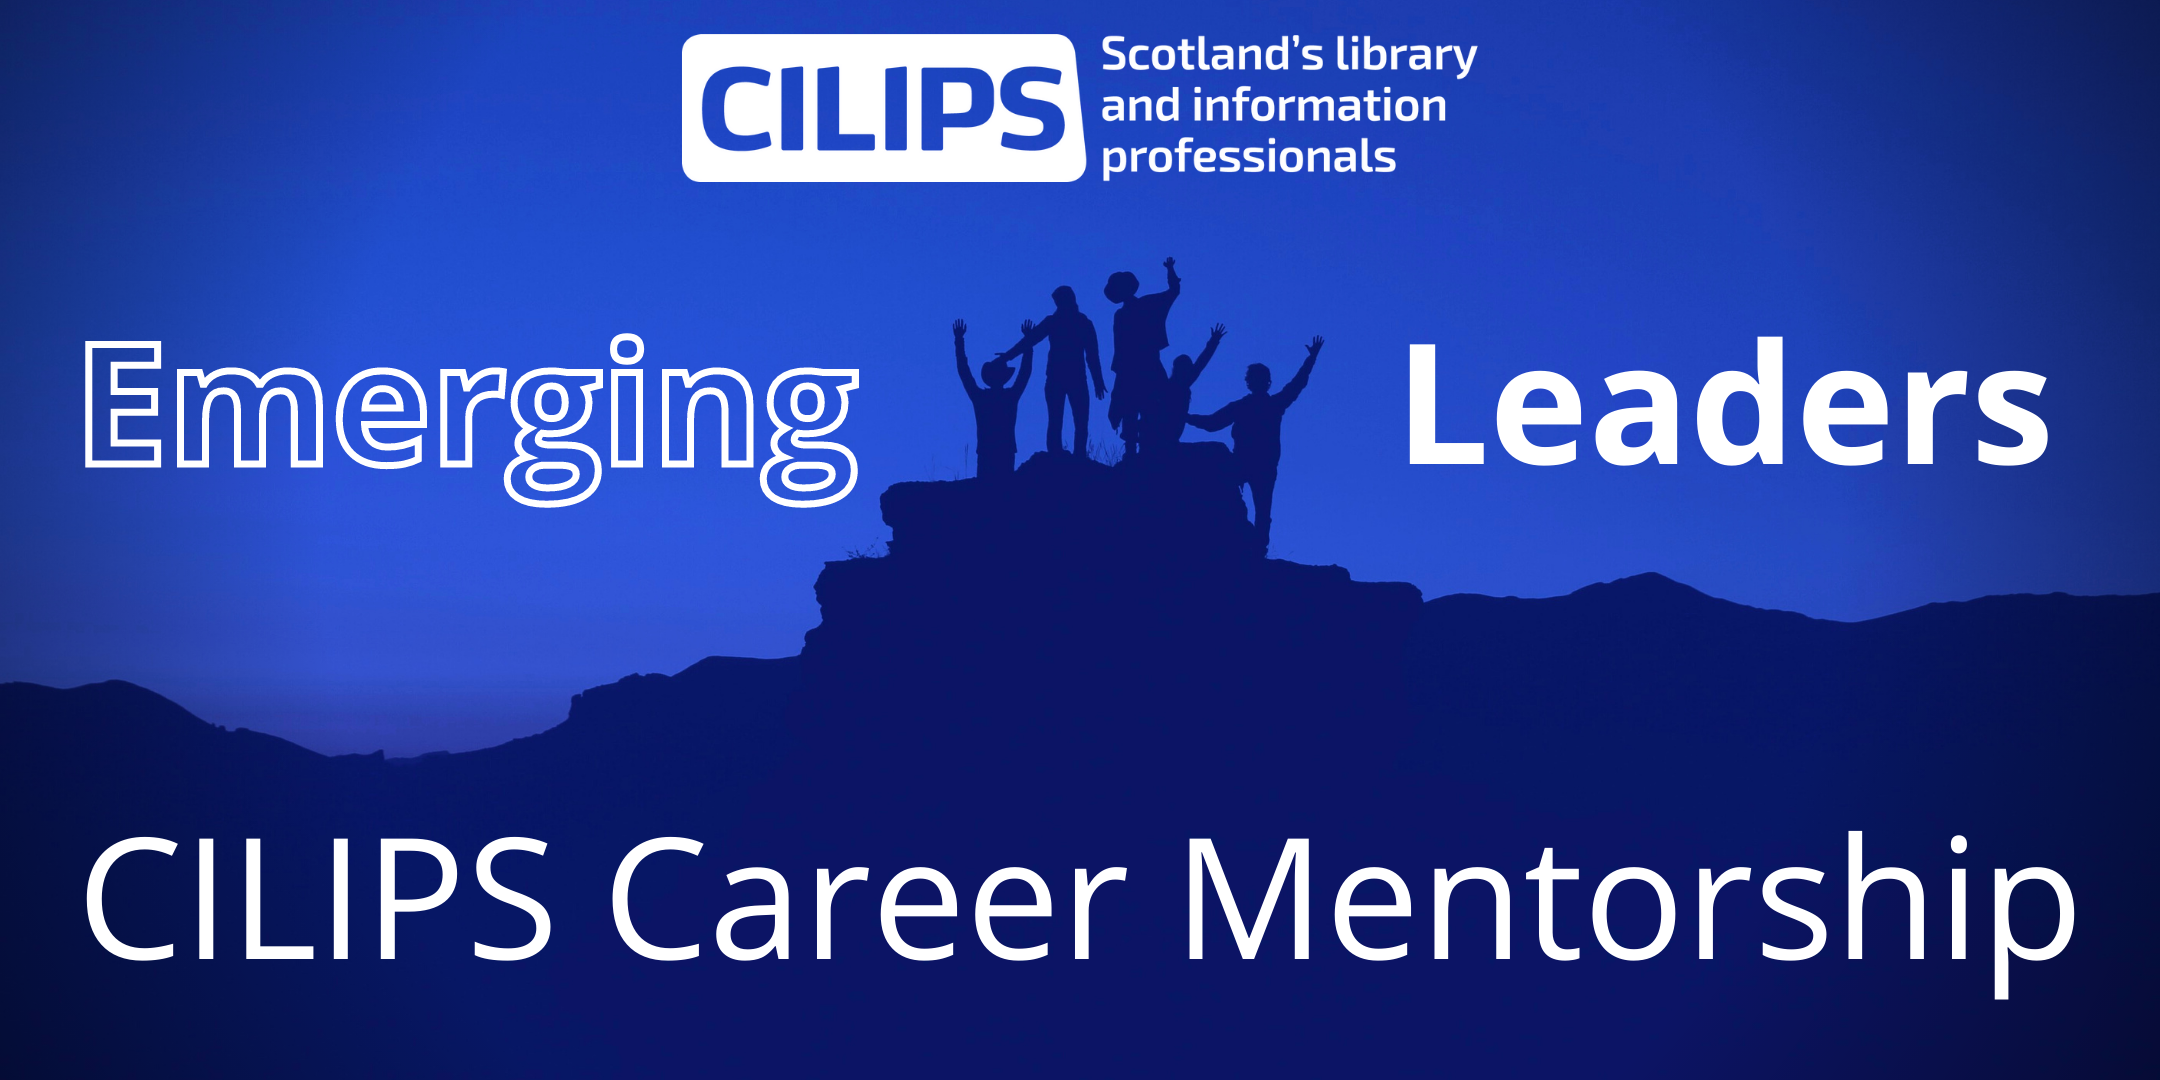 CILIPS Career Mentorship, with white text on a blue background with a silhouette of mountain climbers.